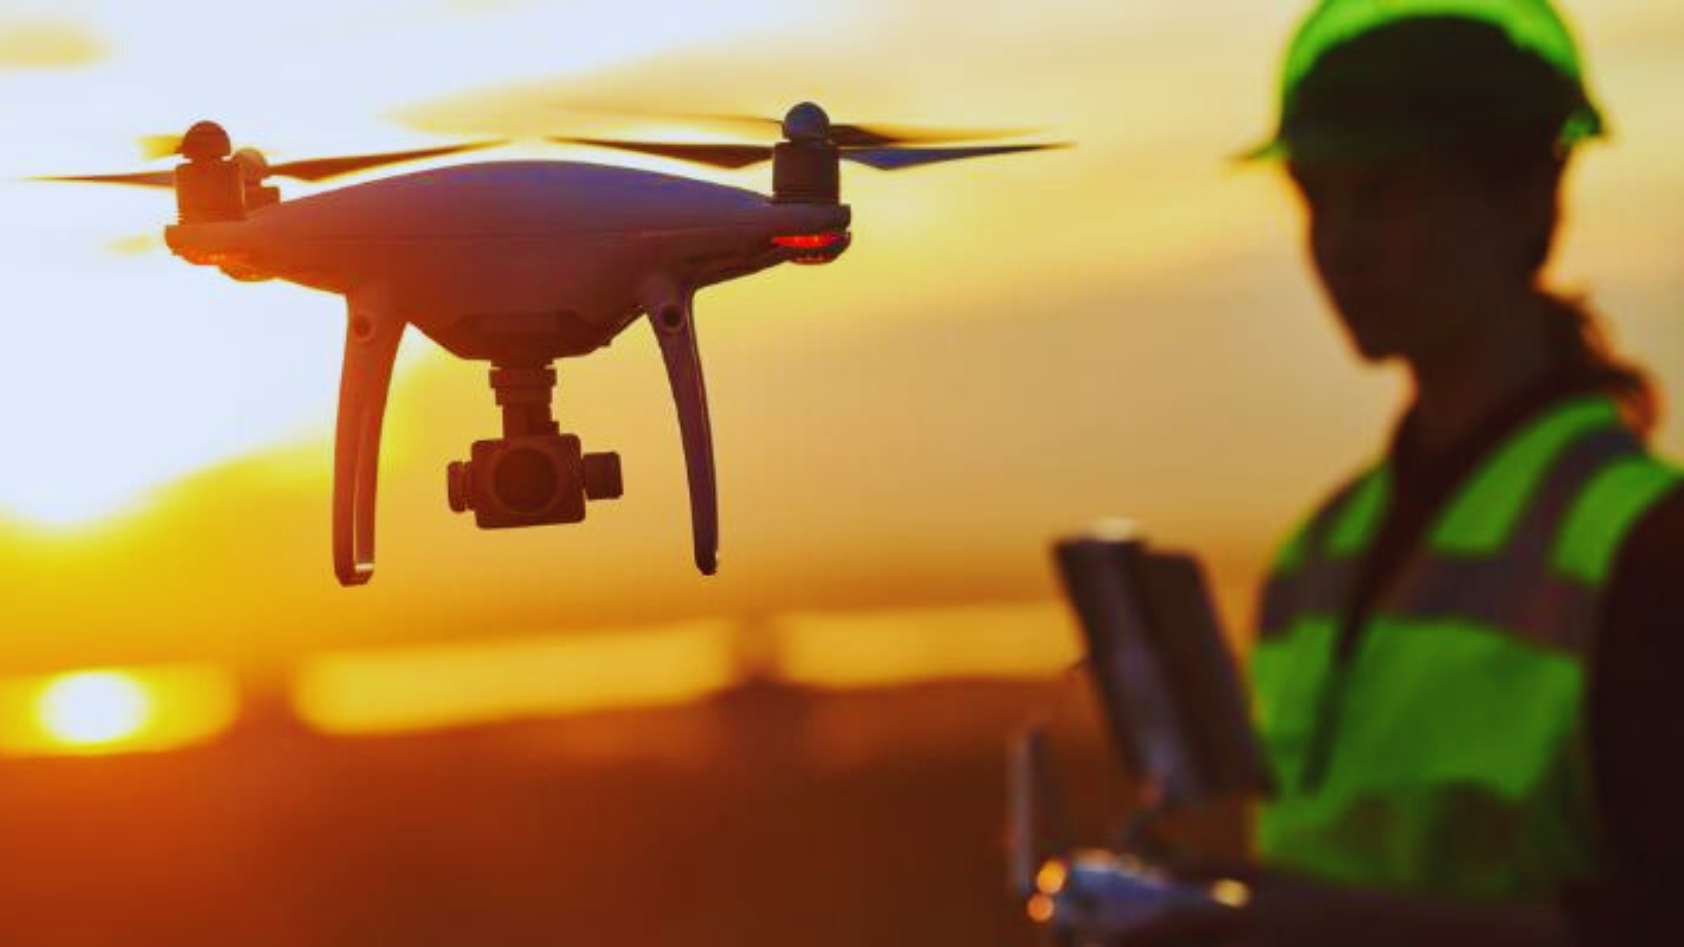 Best Drones for Surveying